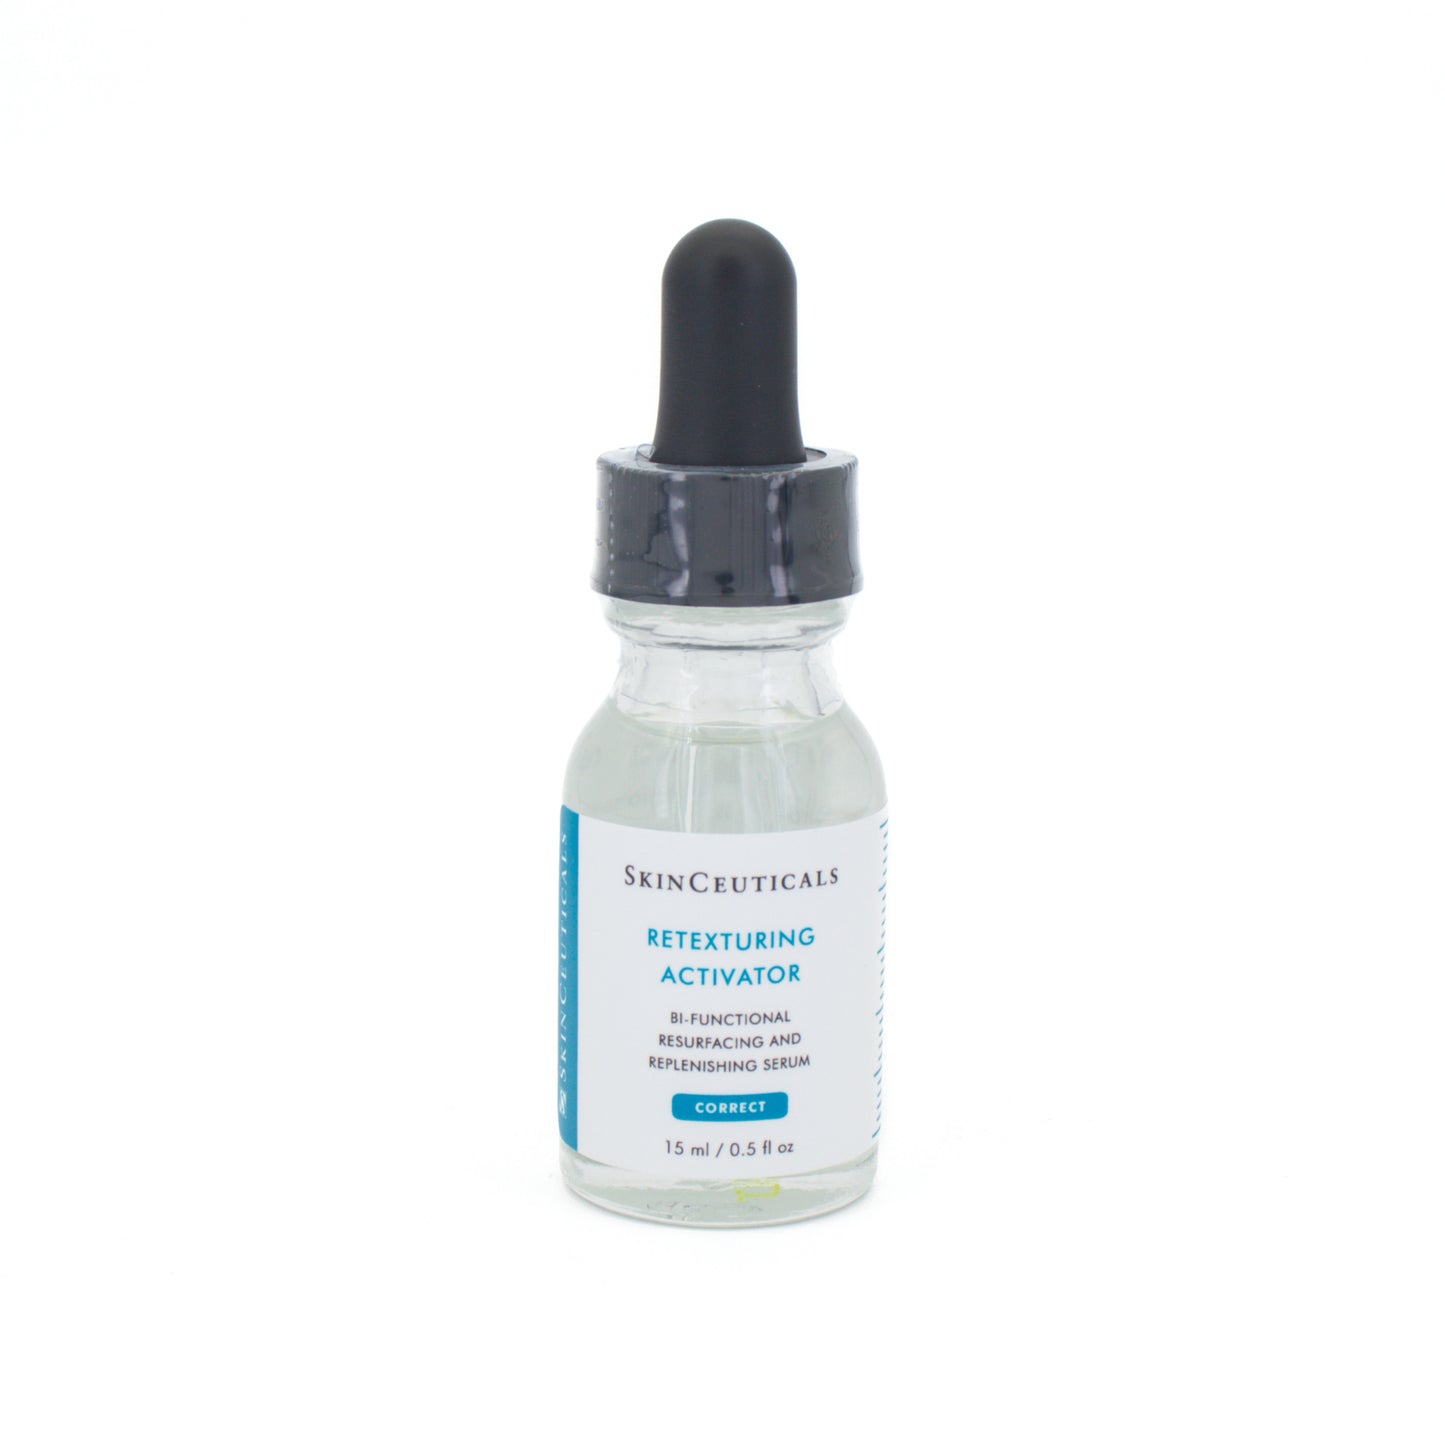 SkinCeuticals Retexturing Activator Hyaluronic Acid Serum 15ml - New - This is Beauty UK